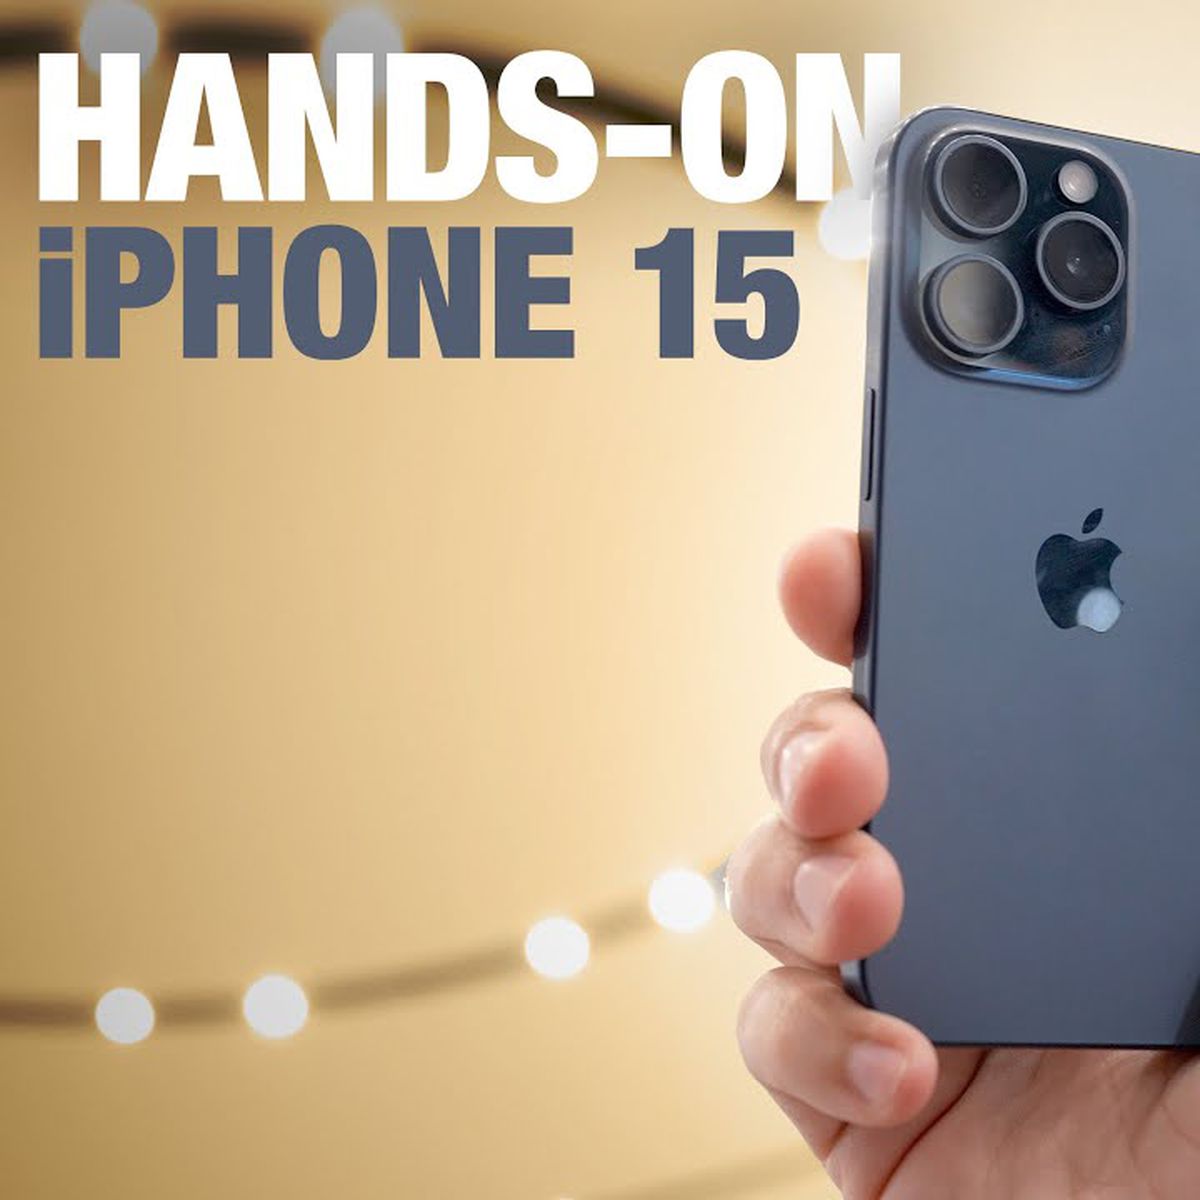 iPhone 15 Pro hands-on: Quality-of-life updates abound this year